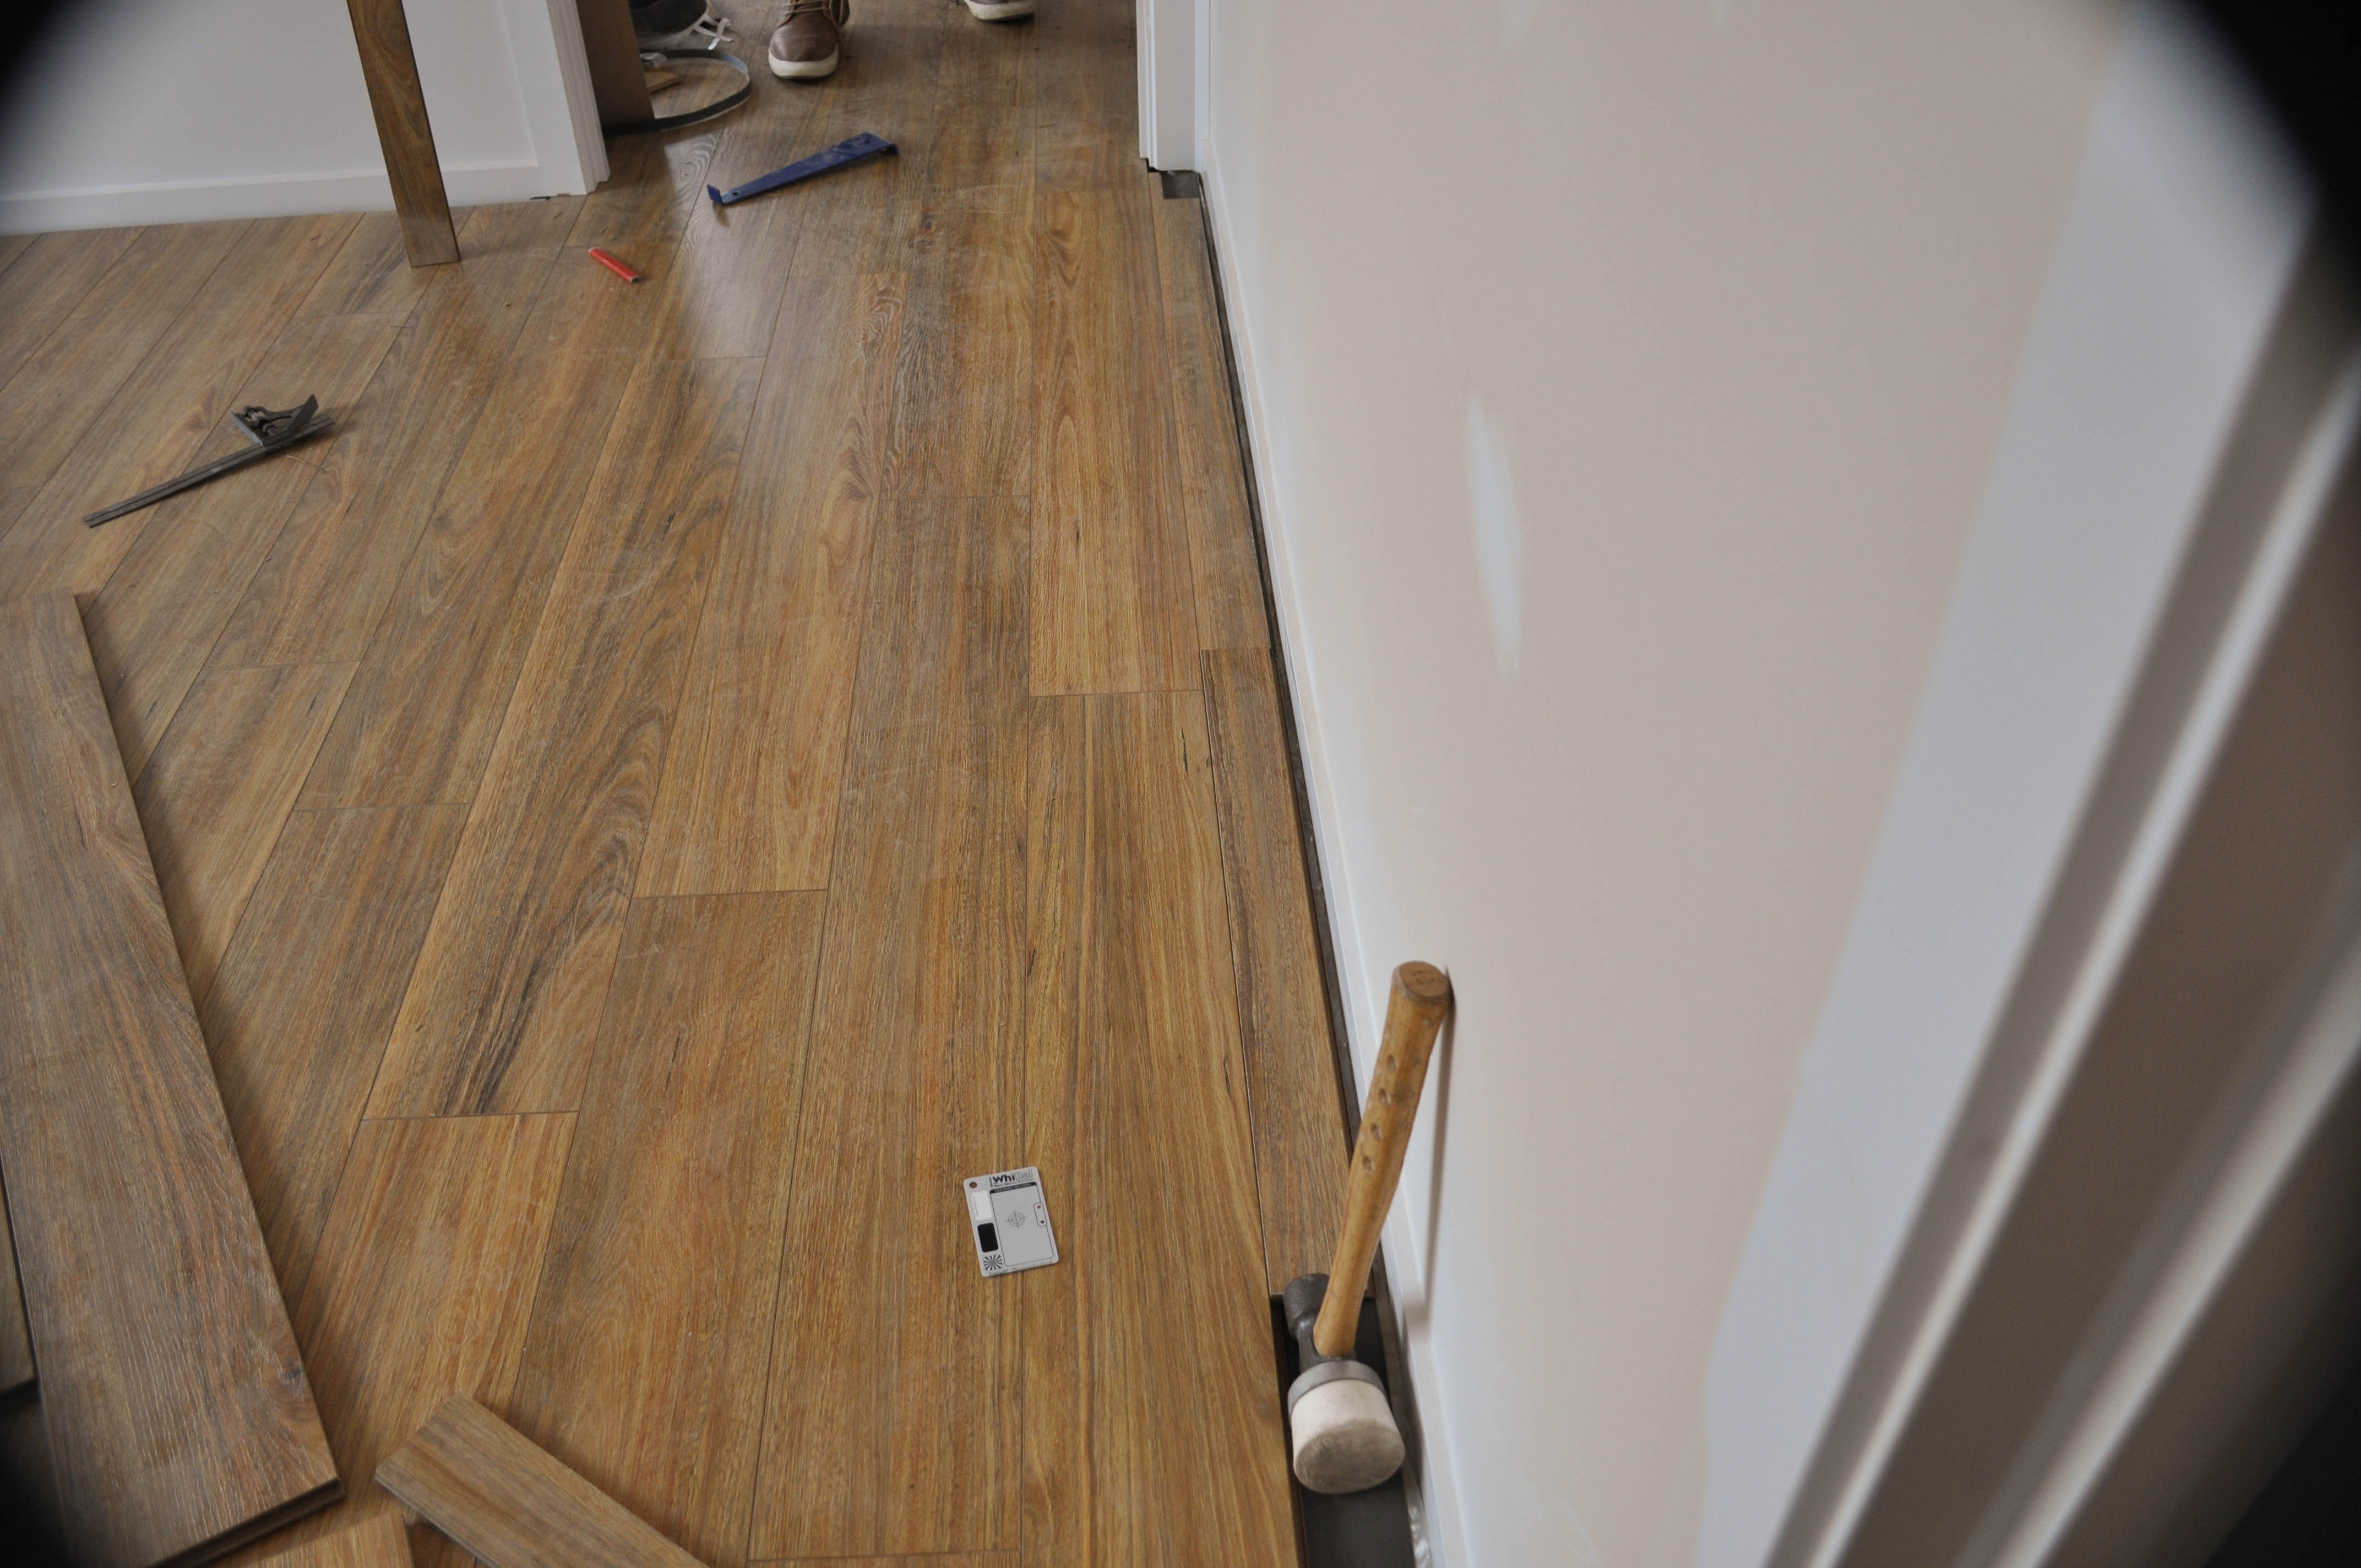 the picture shows the ripped boards being fitted into the floor as the last row of floorboards between the laminate floor and the 
  wall after leaving a 10mm expansion gap. The room shows installed, 12mm thick, Spotted Gum laminate floorboards covering the floor and the last row of boards being hammered into 
  place and position. The room in the suburb of Point Cook, Werribee Vic 3030 by Concord Floors and the boards were supplied and installed by Concord Floors. This is information
   as to how to install laminate flooring for the do it yourself floor board laminate flooring installer.